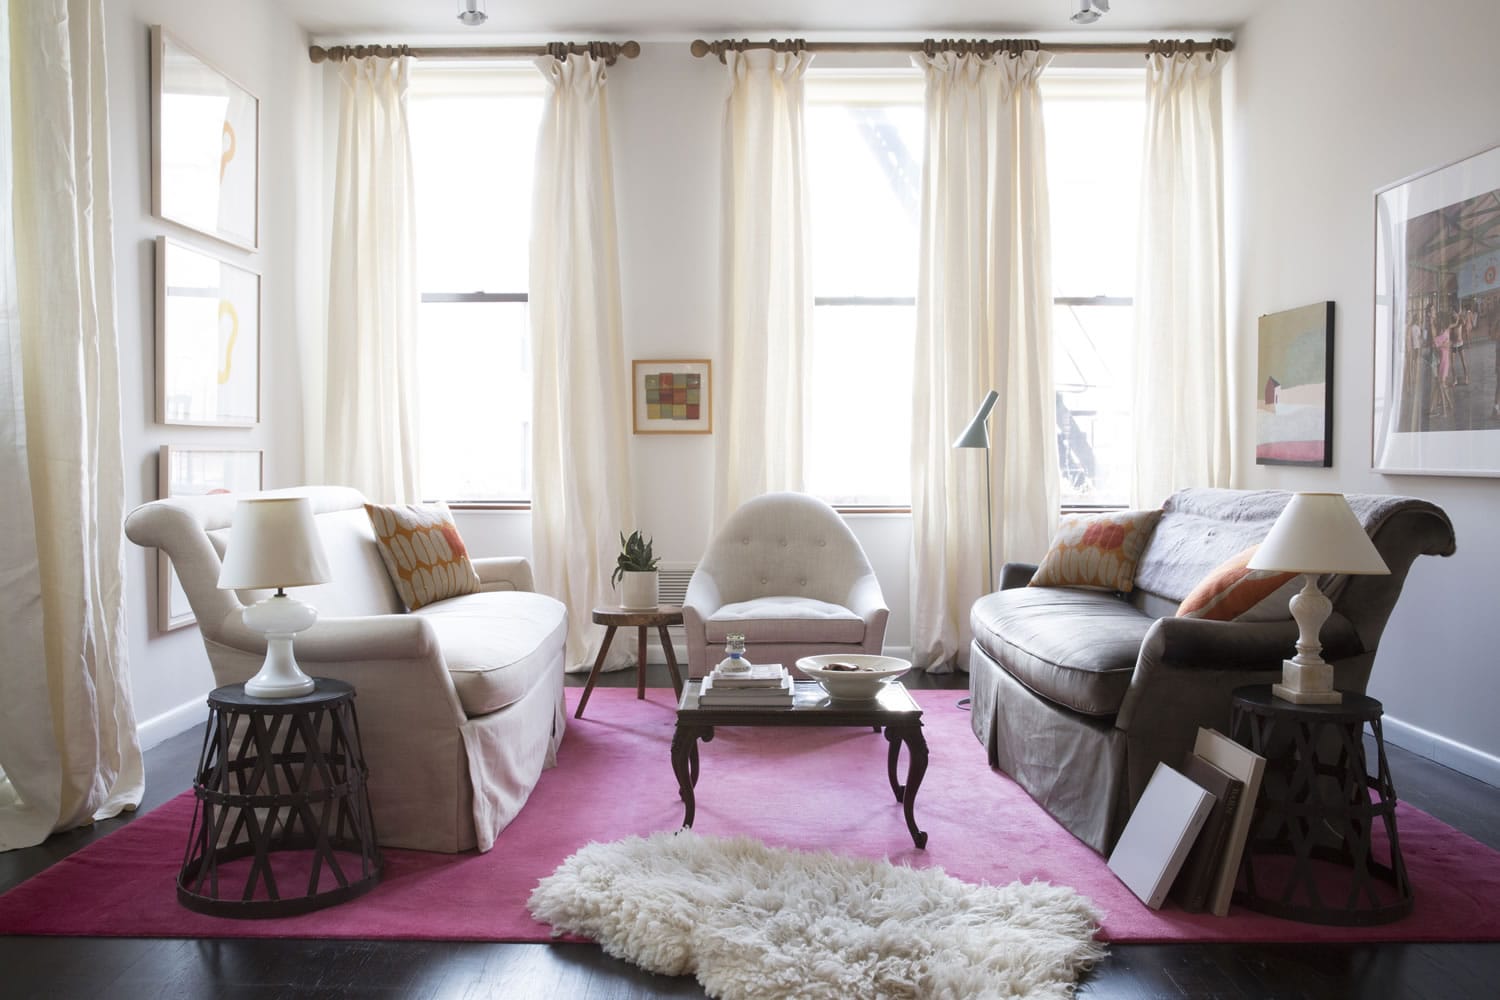 Floor-to-ceiling curtains can make a room seem taller, says designer Maxwell Ryan, founder of apartmenttherapy.com.